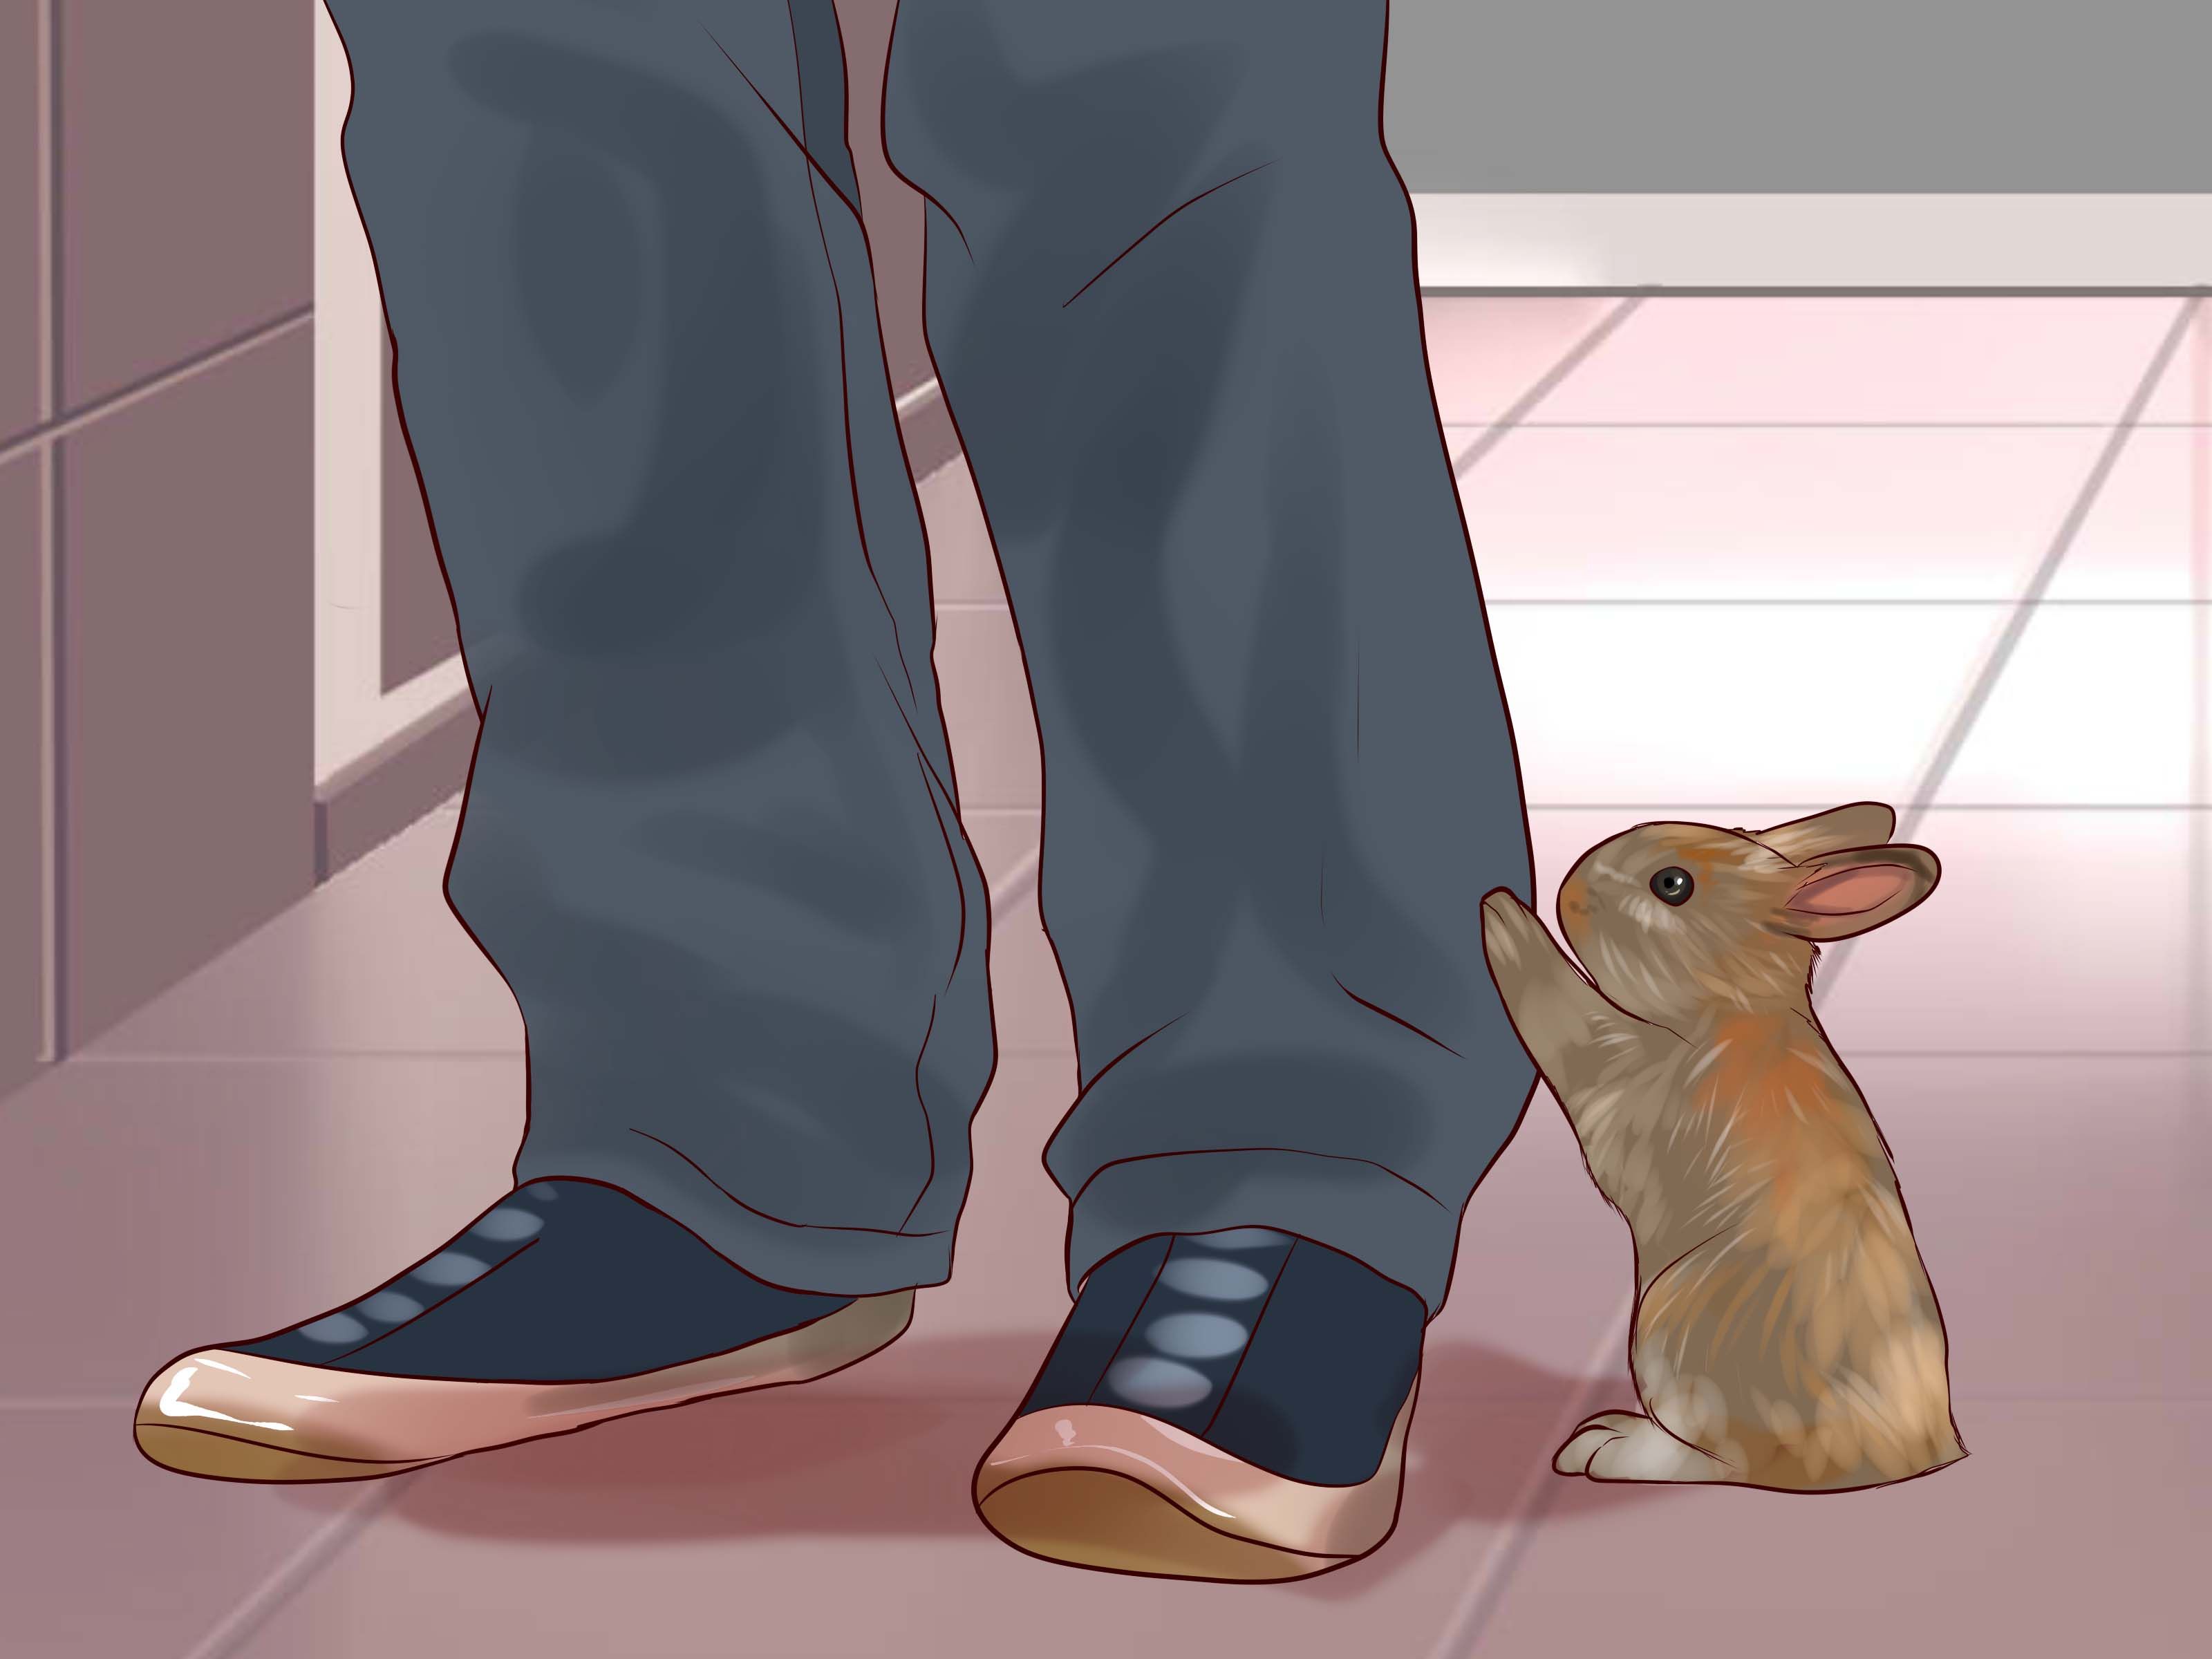 How to Play With Your Rabbit: 9 Steps (with Pictures) - wikiHow